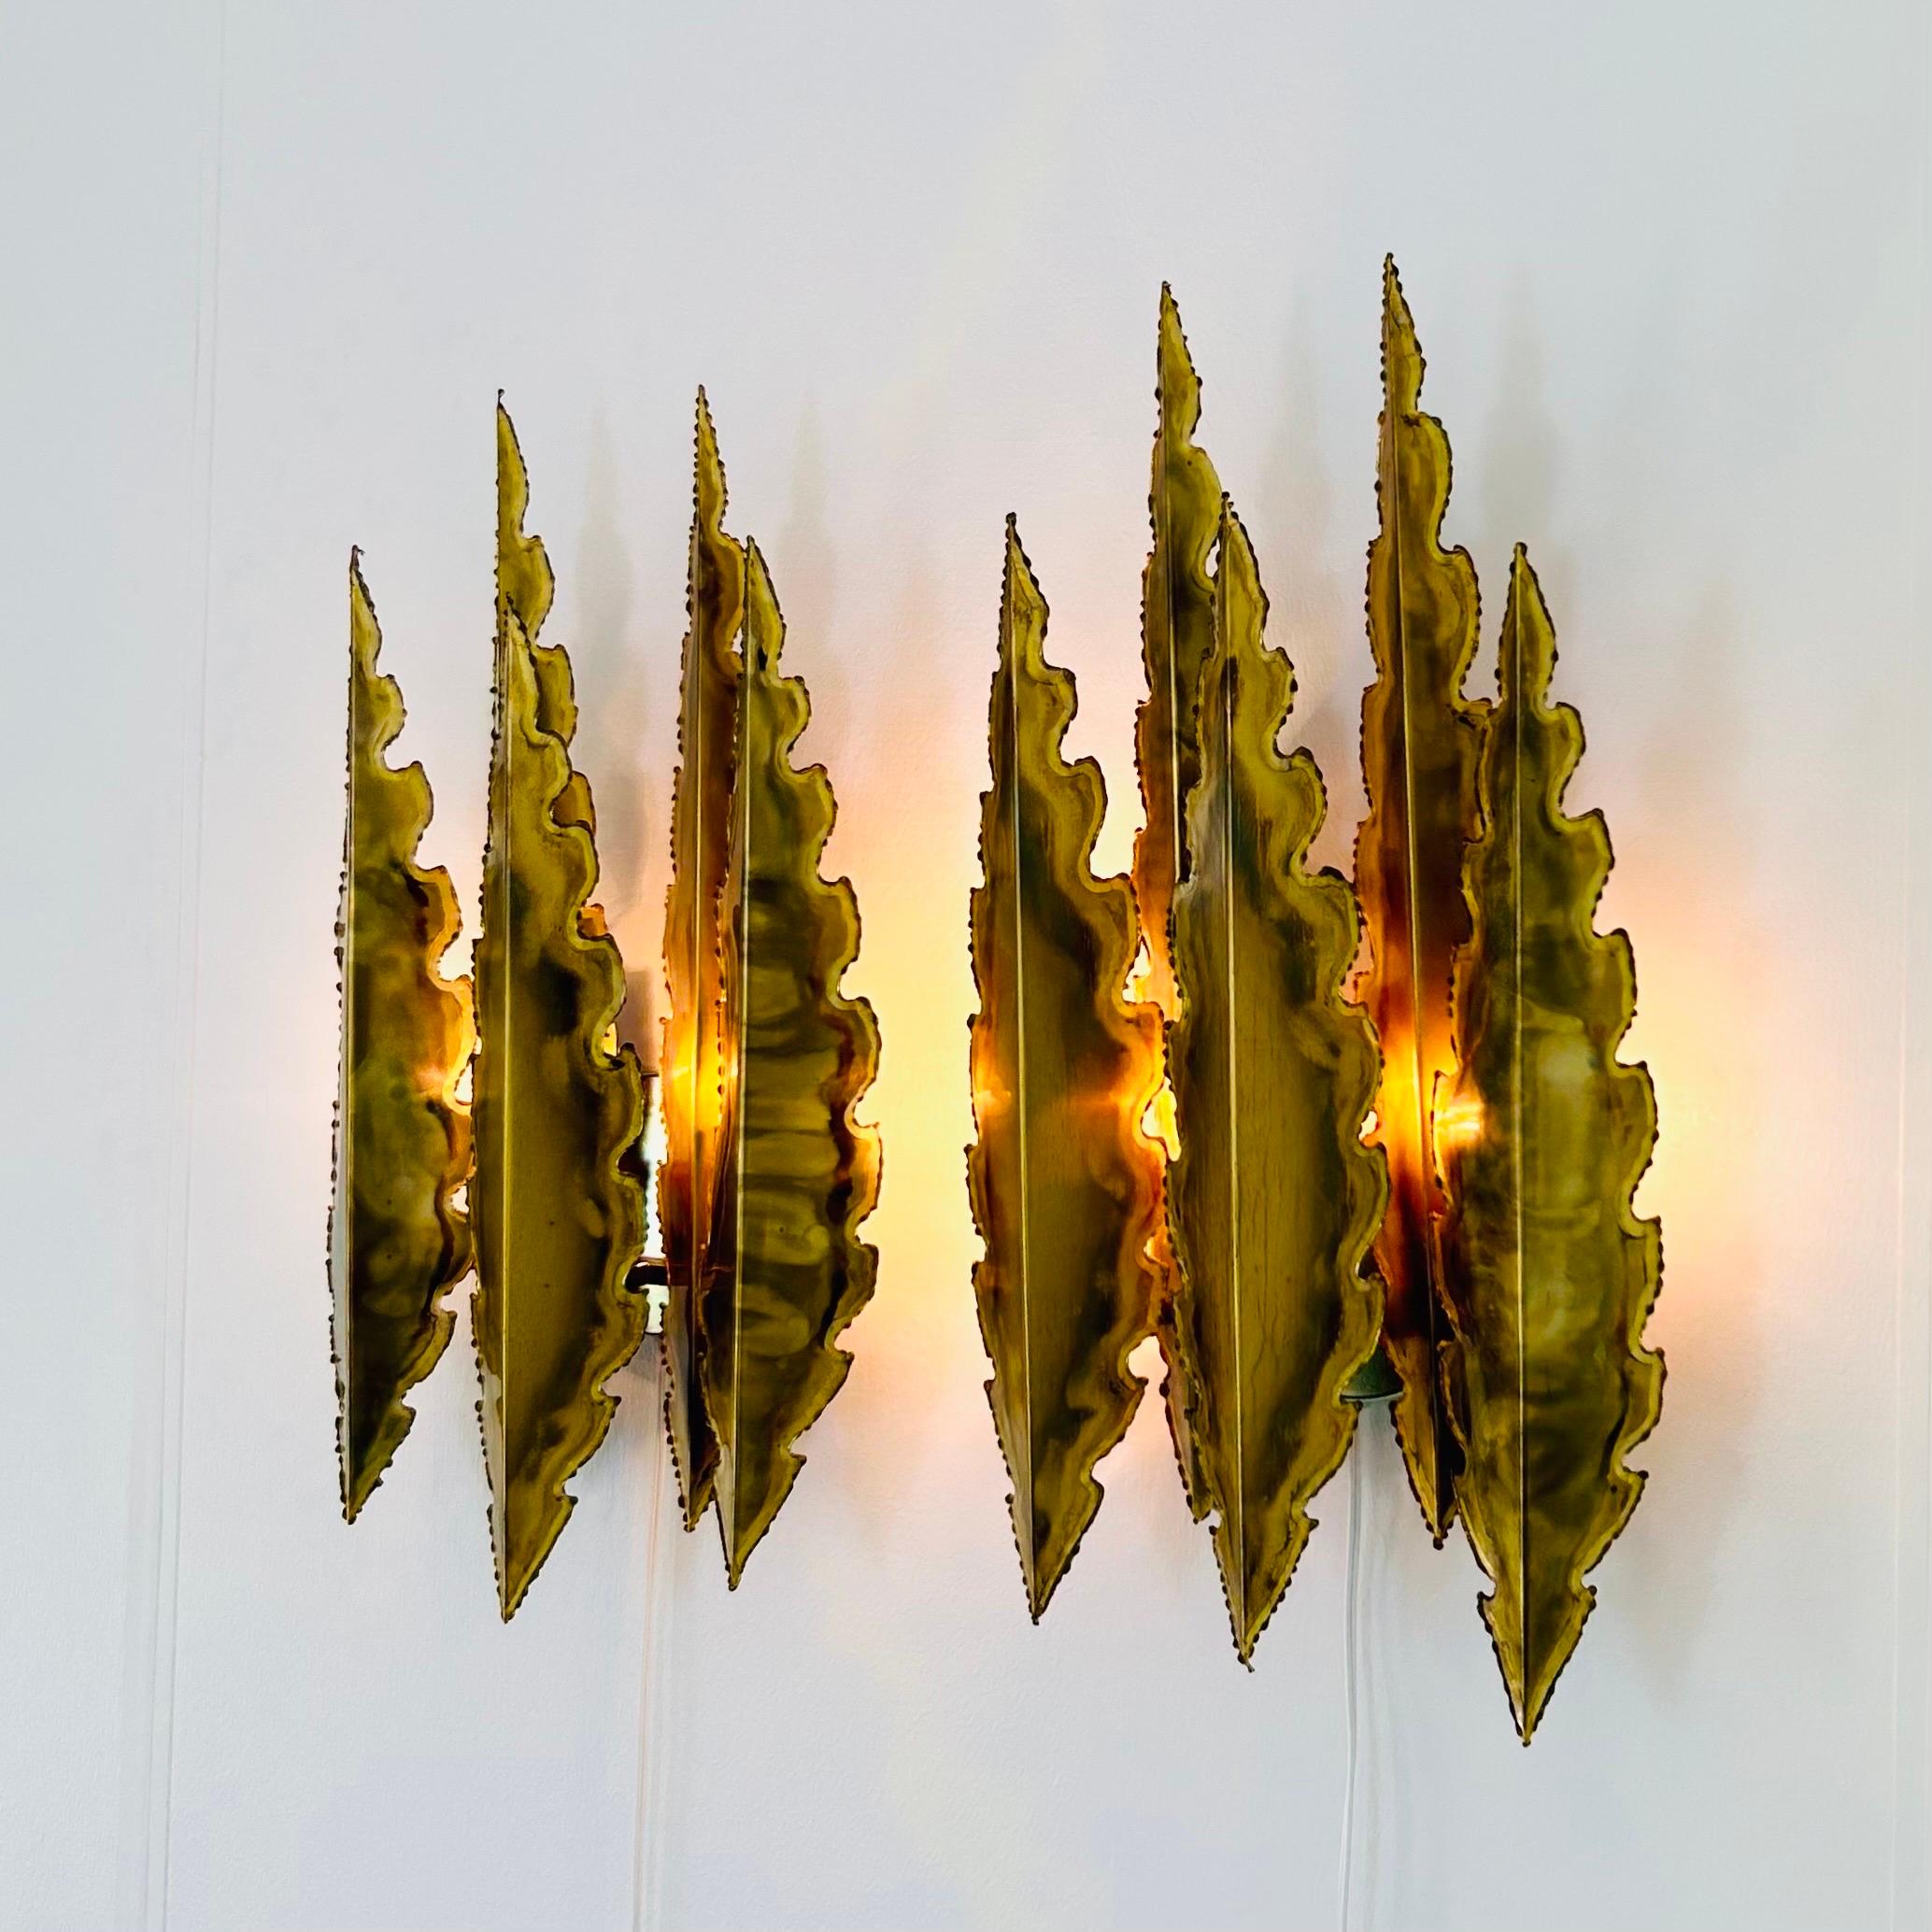 Danish Pair of Large Brass Wall Lamps by Svend Aage Holm Sorensen, 1960s, Denmark